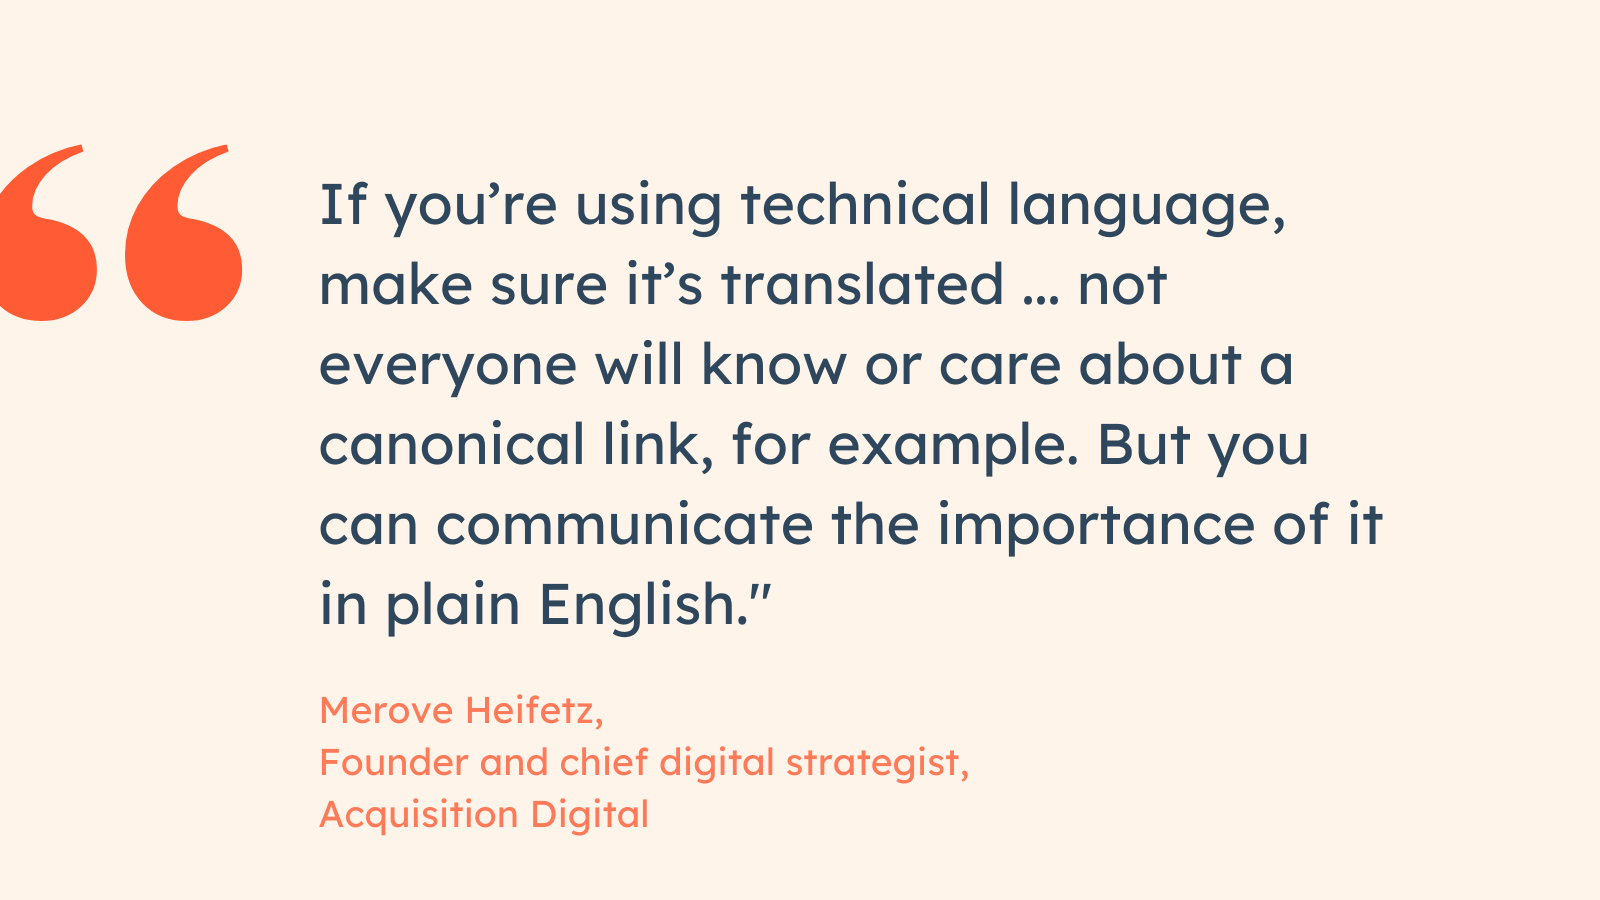 “If you’re using technical language, make sure it’s translated … not everyone will know or care about a canonical link, for example. But you can communicate the importance of it in plain English.” Merove Heifetz, Founder and chief digital strategist, Acquisition Digital.